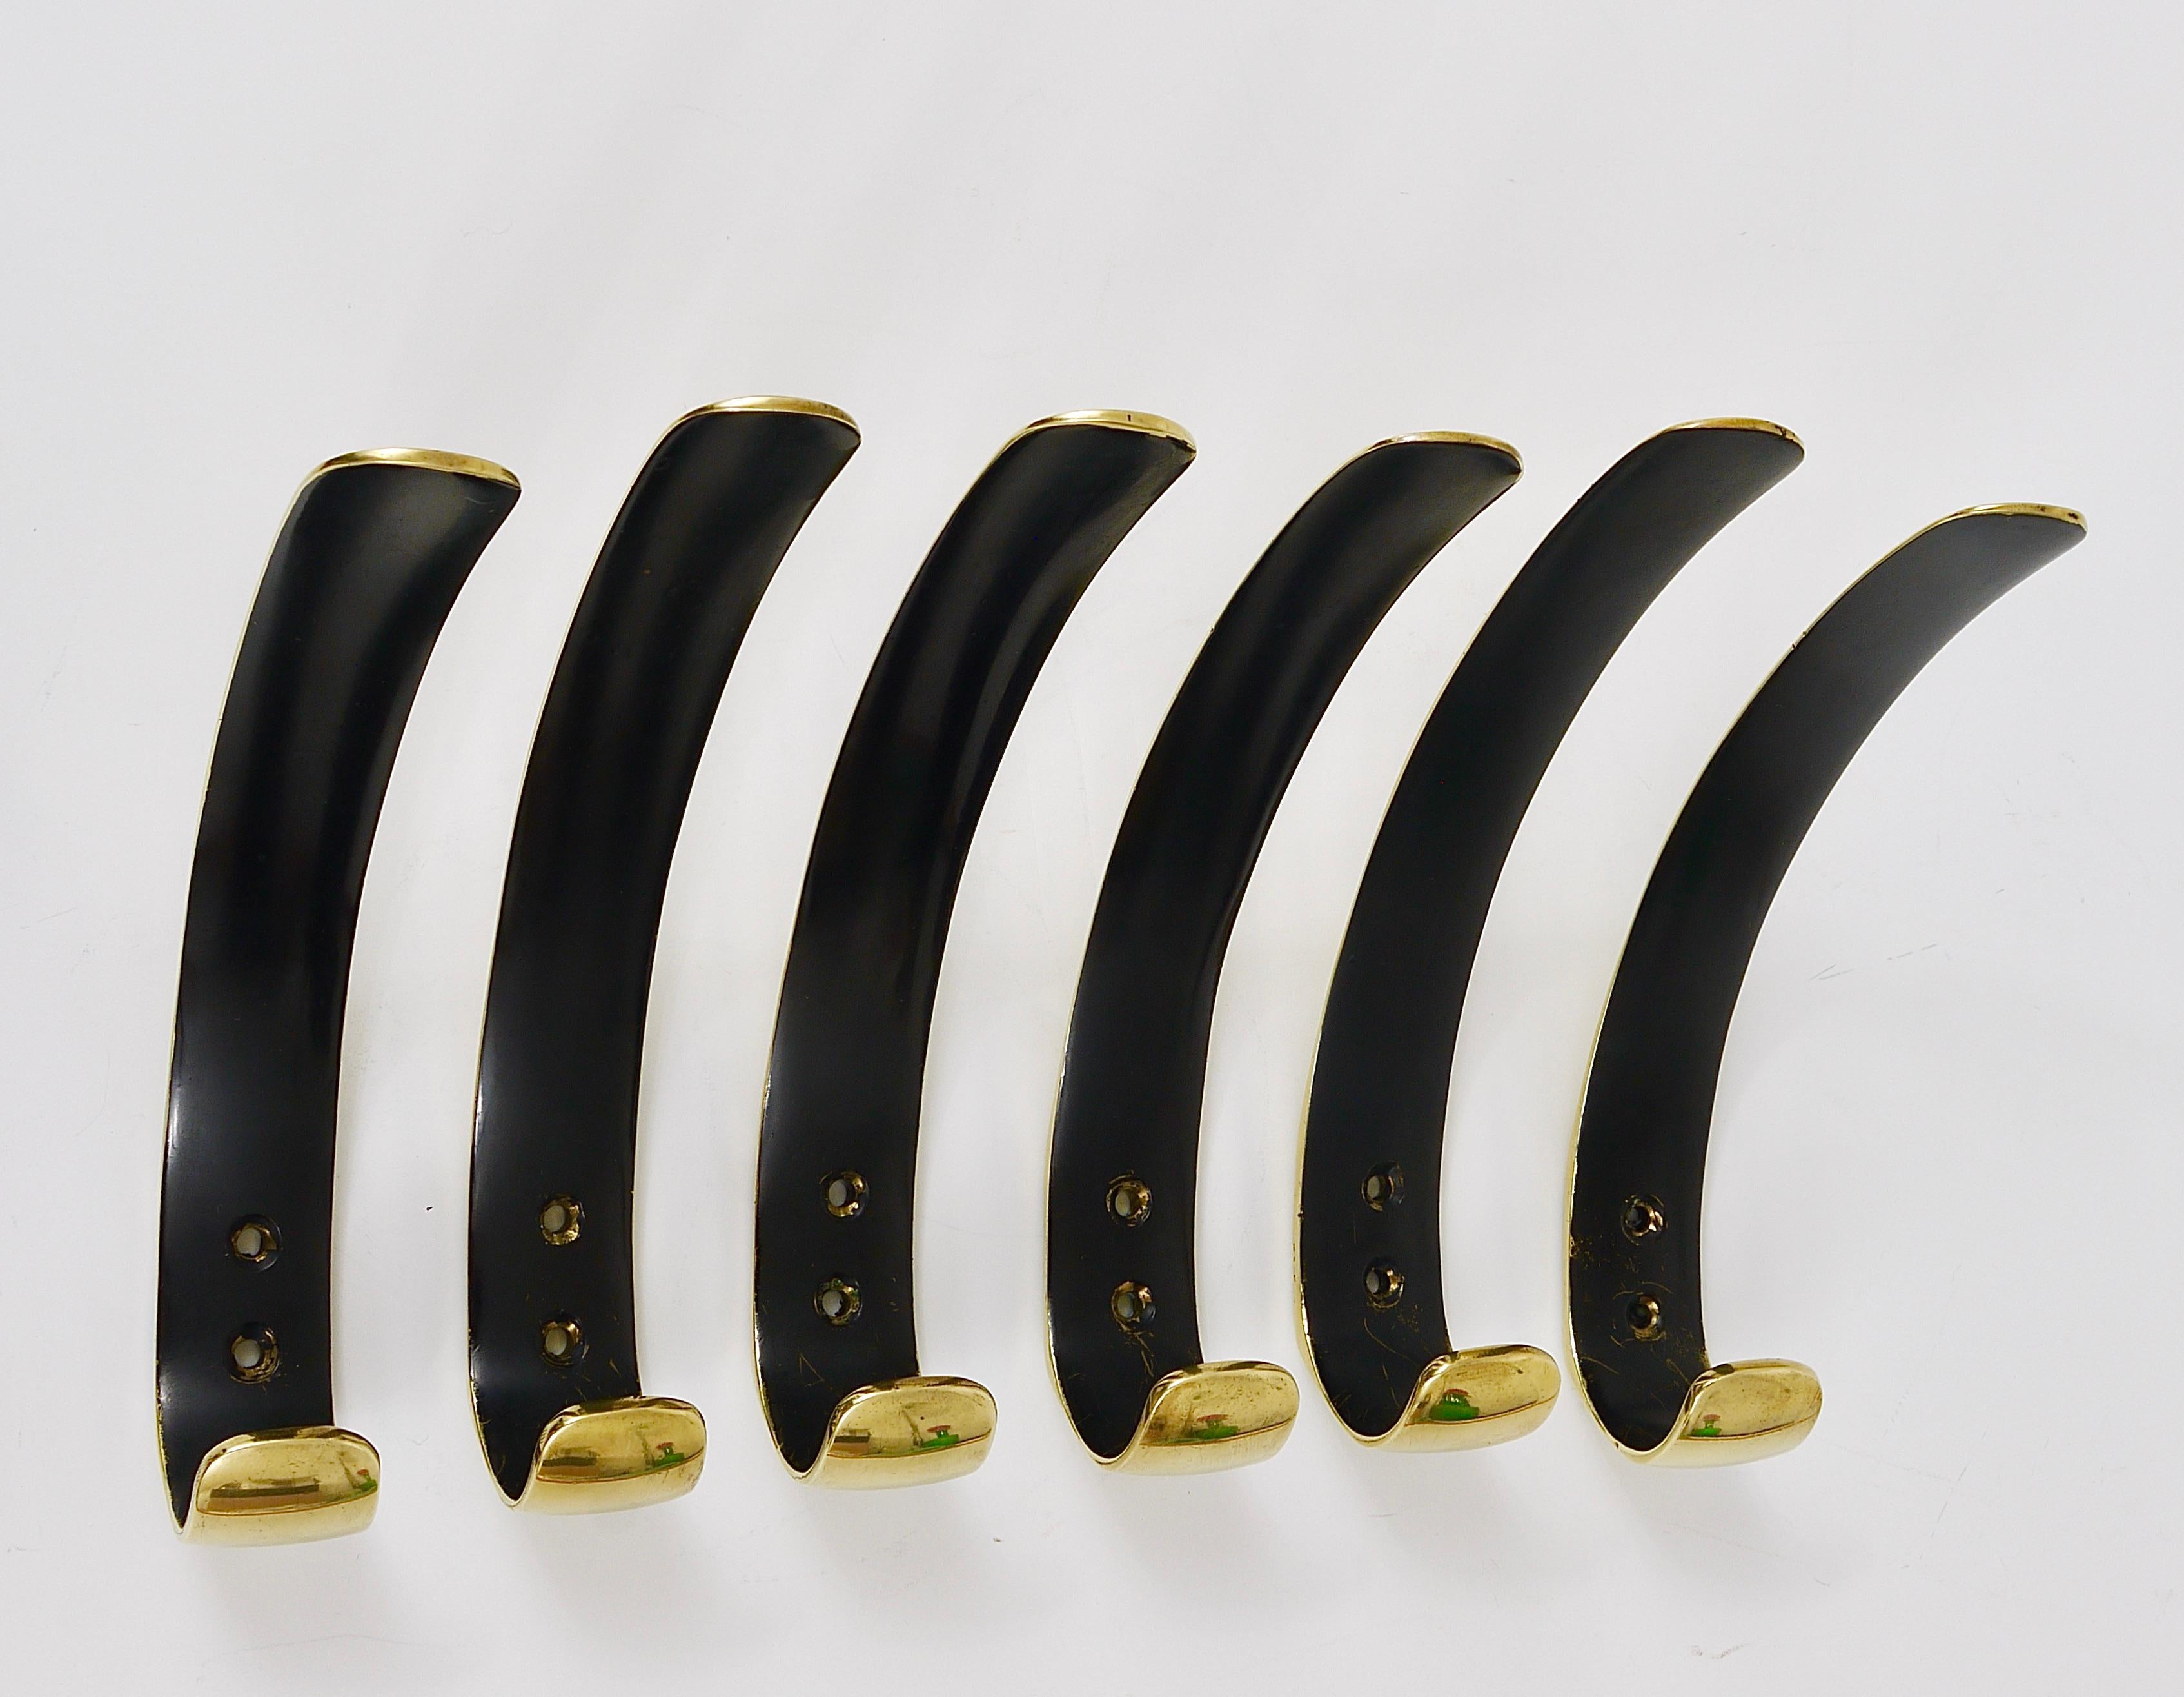 Up to Six Mid-Century Brass Wall Coat Hooks by Herta Baller, Austria, 1950s For Sale 8